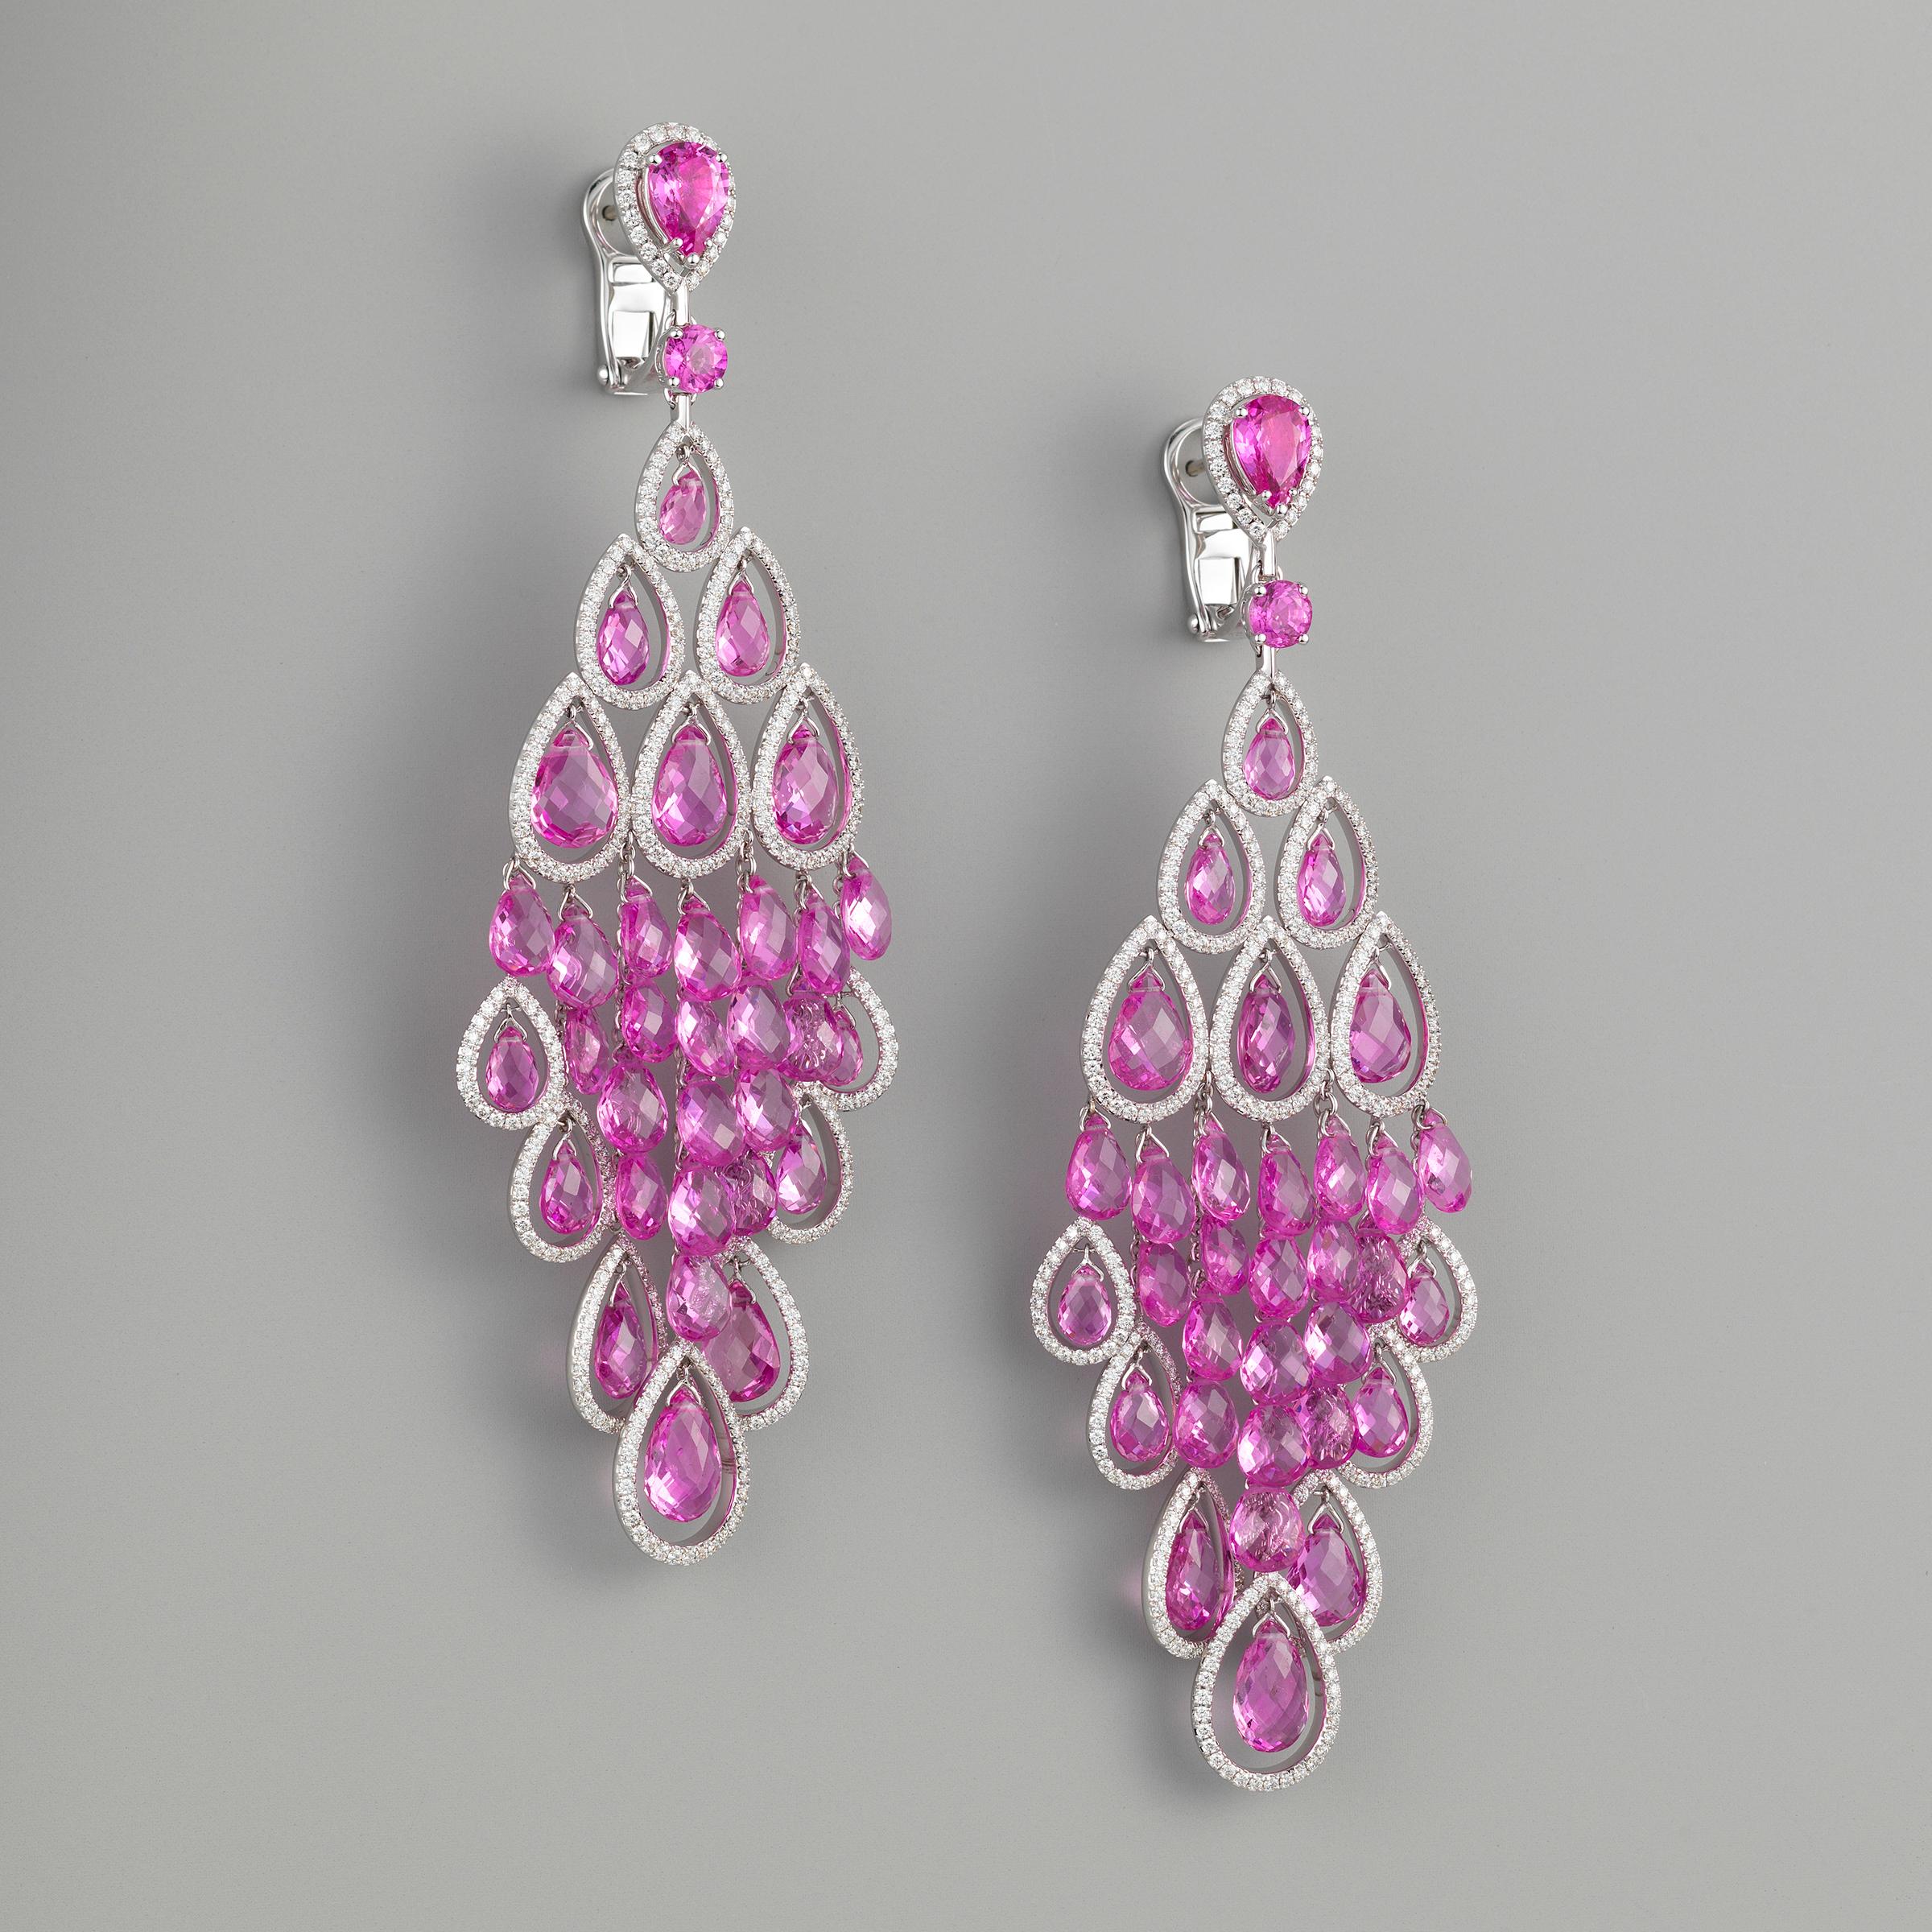 Exceptional Graff chandelier earrings bursting with vibrant style and showcasing approximately 57 carats of vivid natural pink sapphires and 4 carats of fine white diamonds (F to G color), all flawlessly set in 18 karat white gold. The earrings are